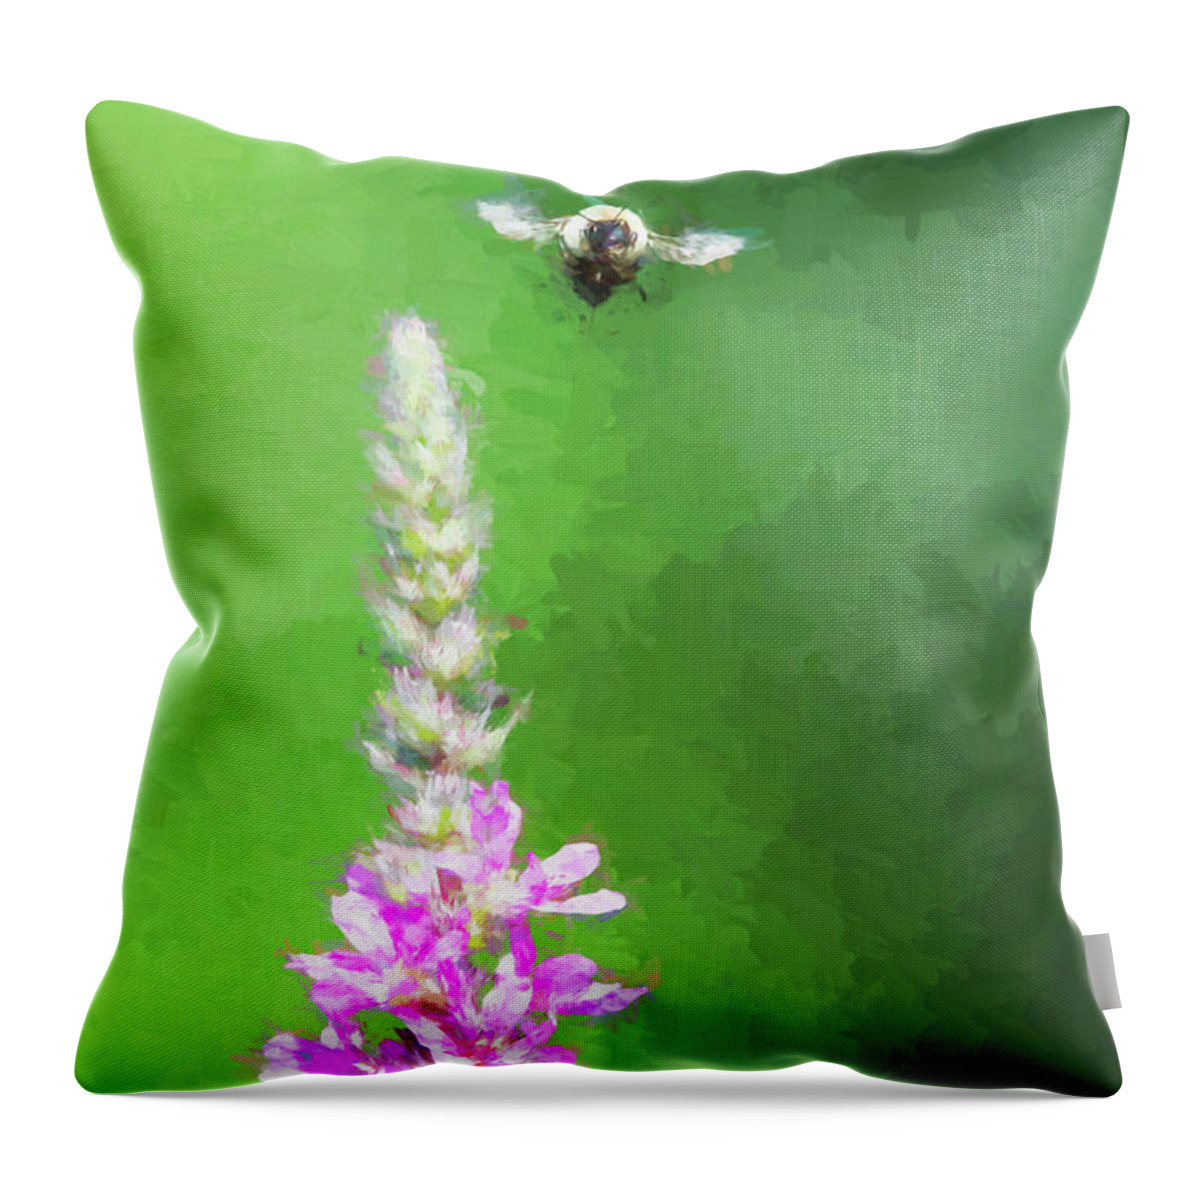 Green Throw Pillow featuring the digital art Bee Over Flowers by Ed Taylor